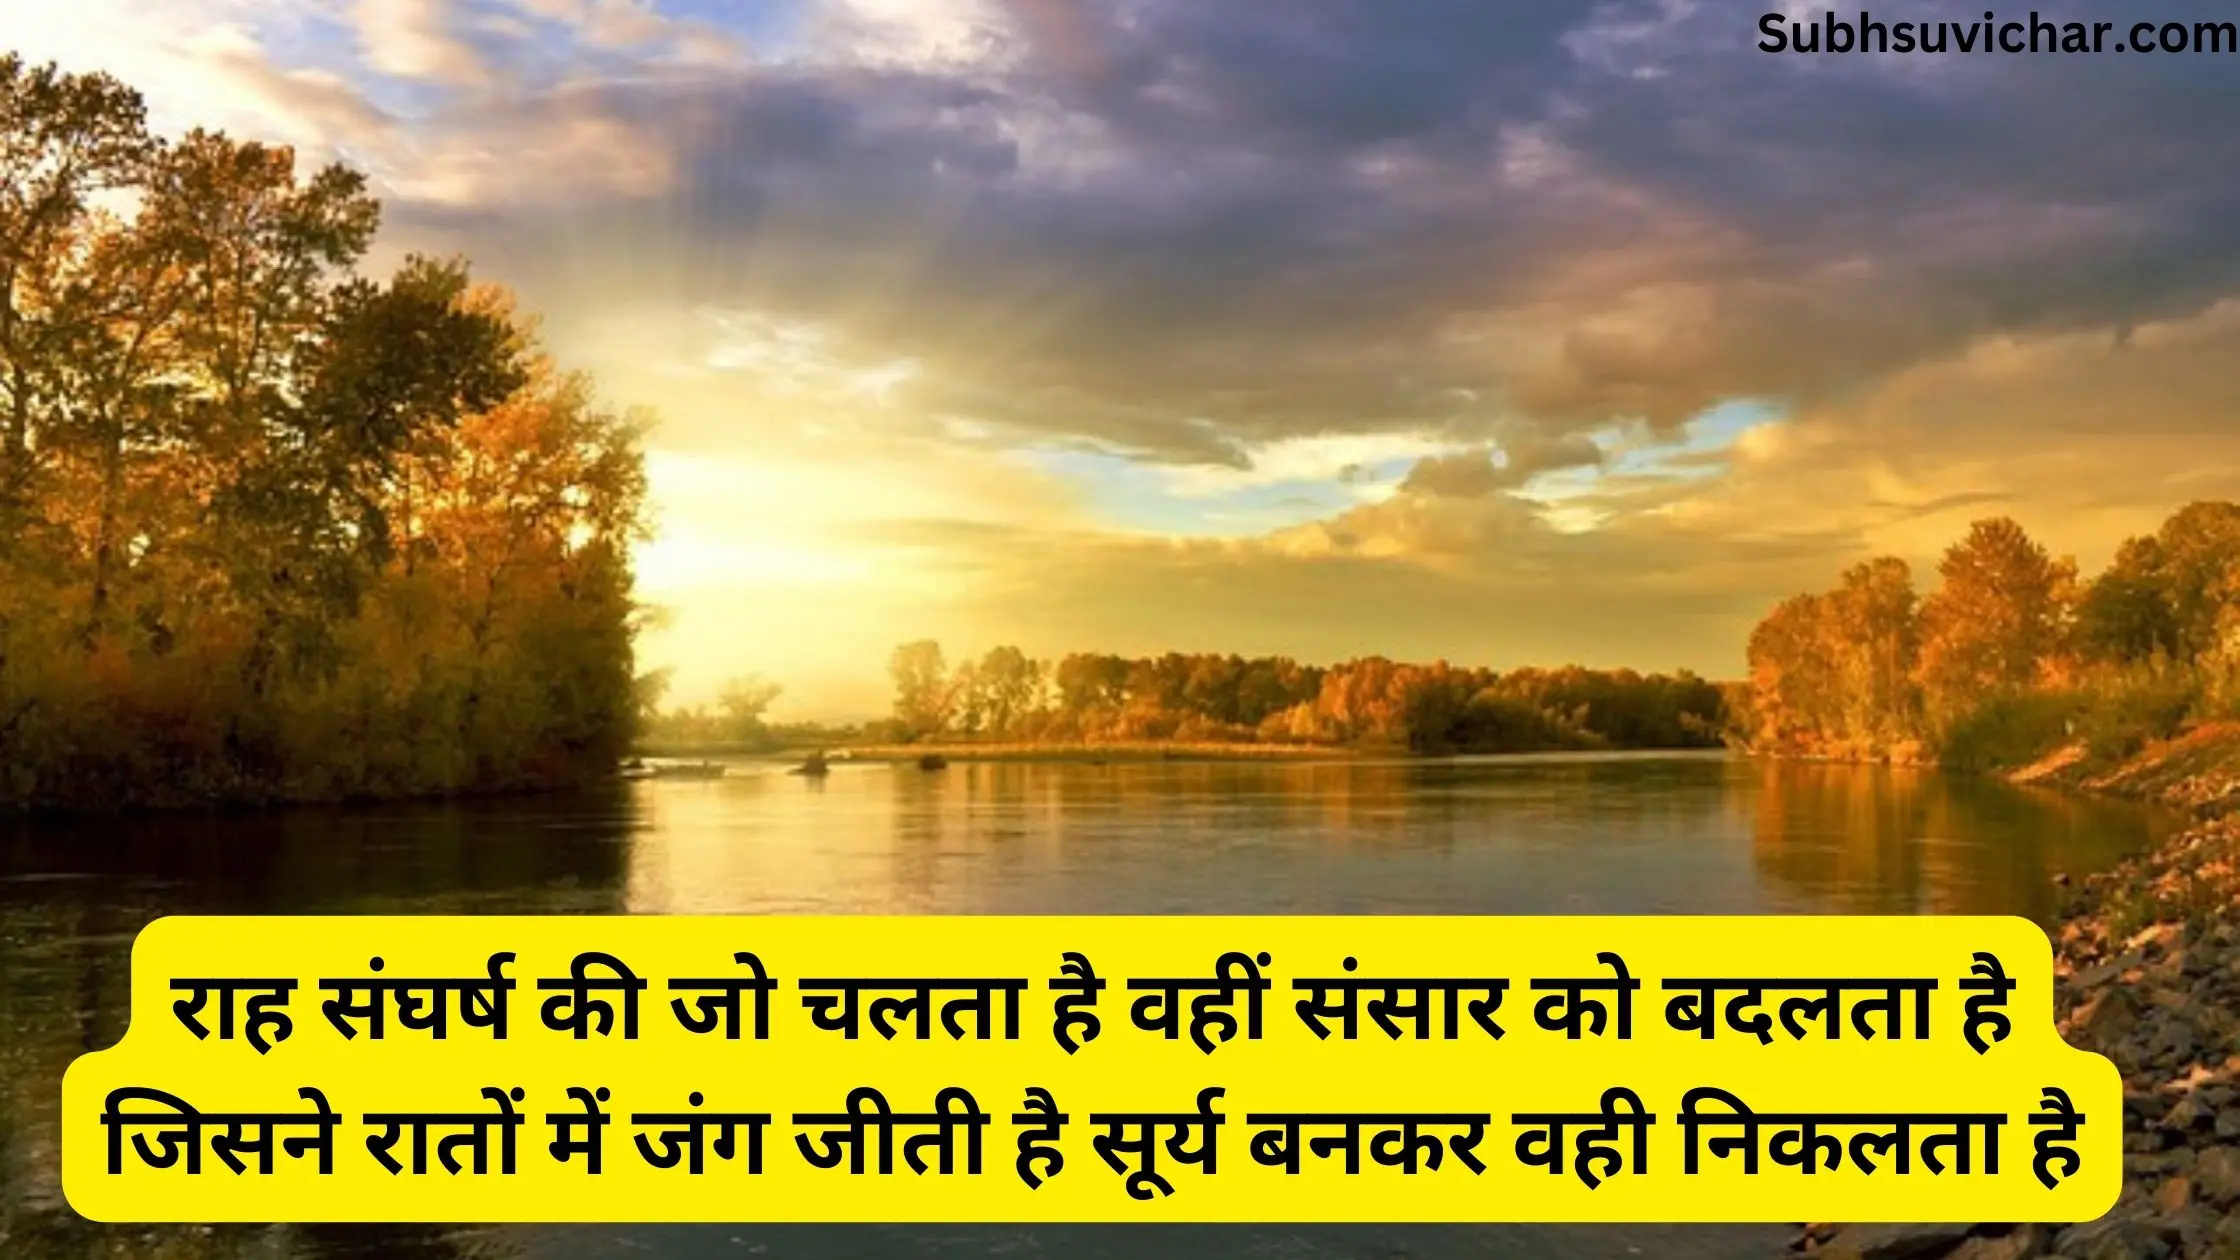 This post contains huge collection of suvichar in hindi font with high quality of images for your whatsapp and facebook status.